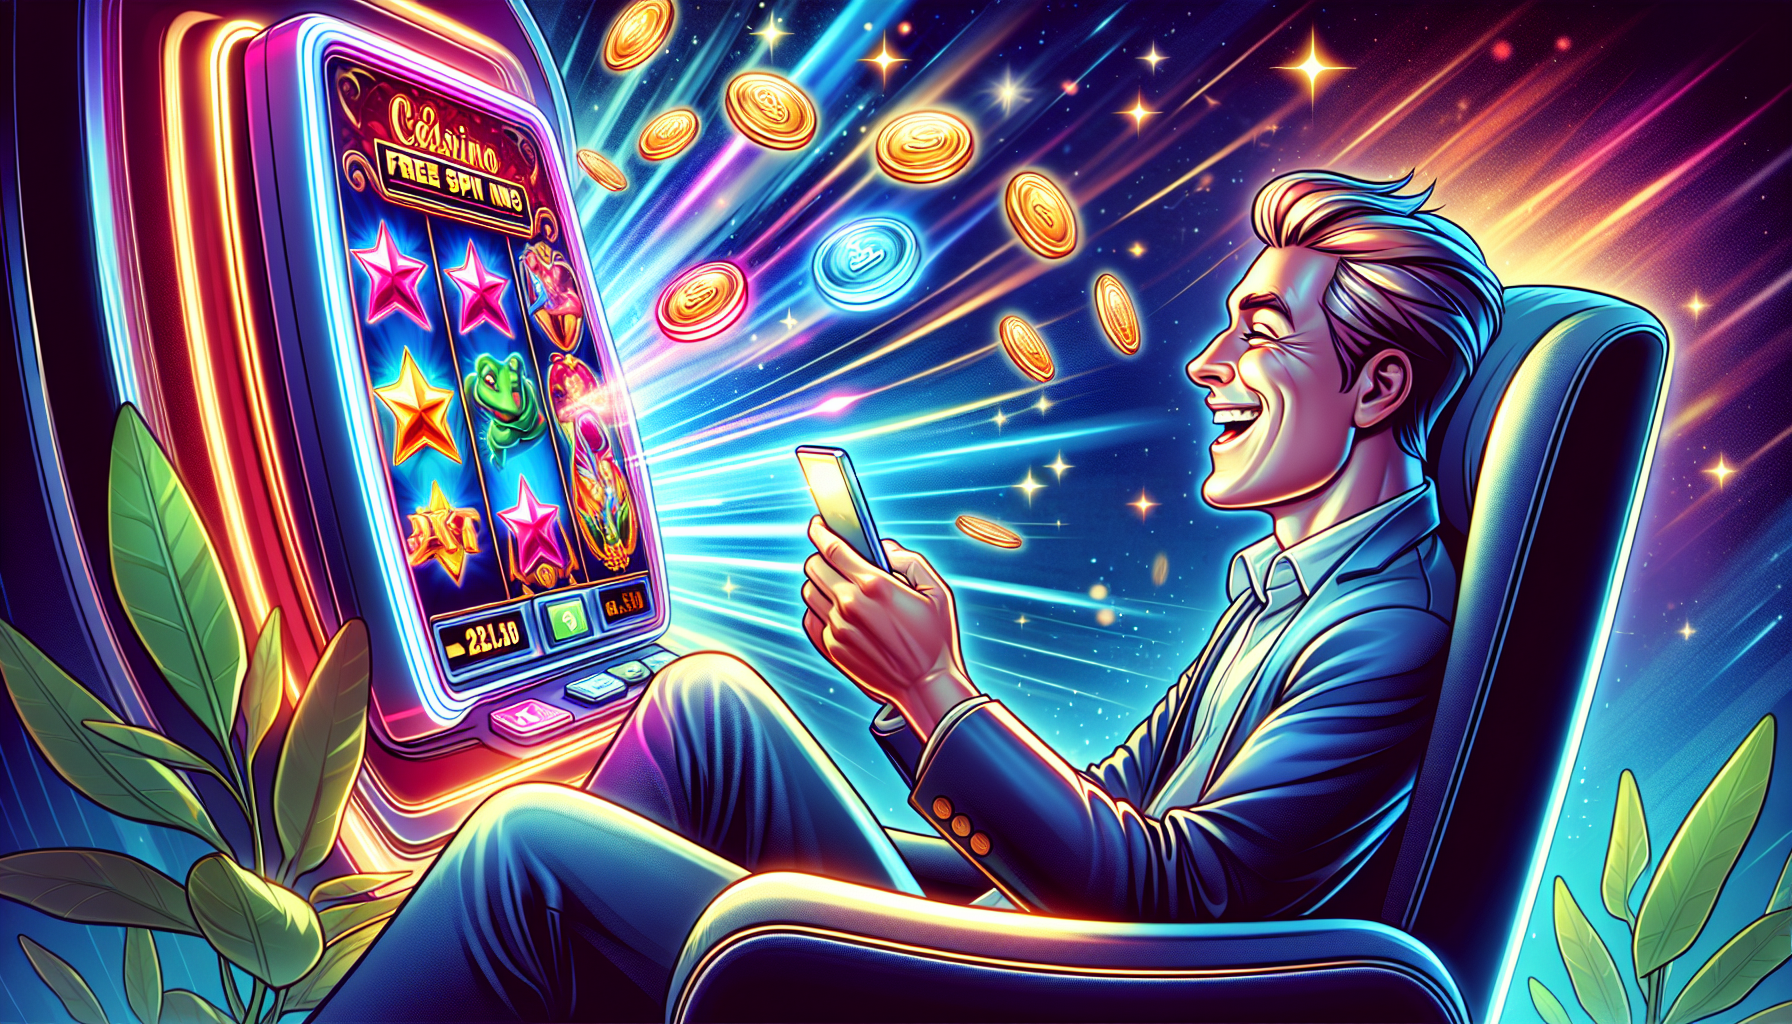 Illustration of a person enjoying mobile casino free spins